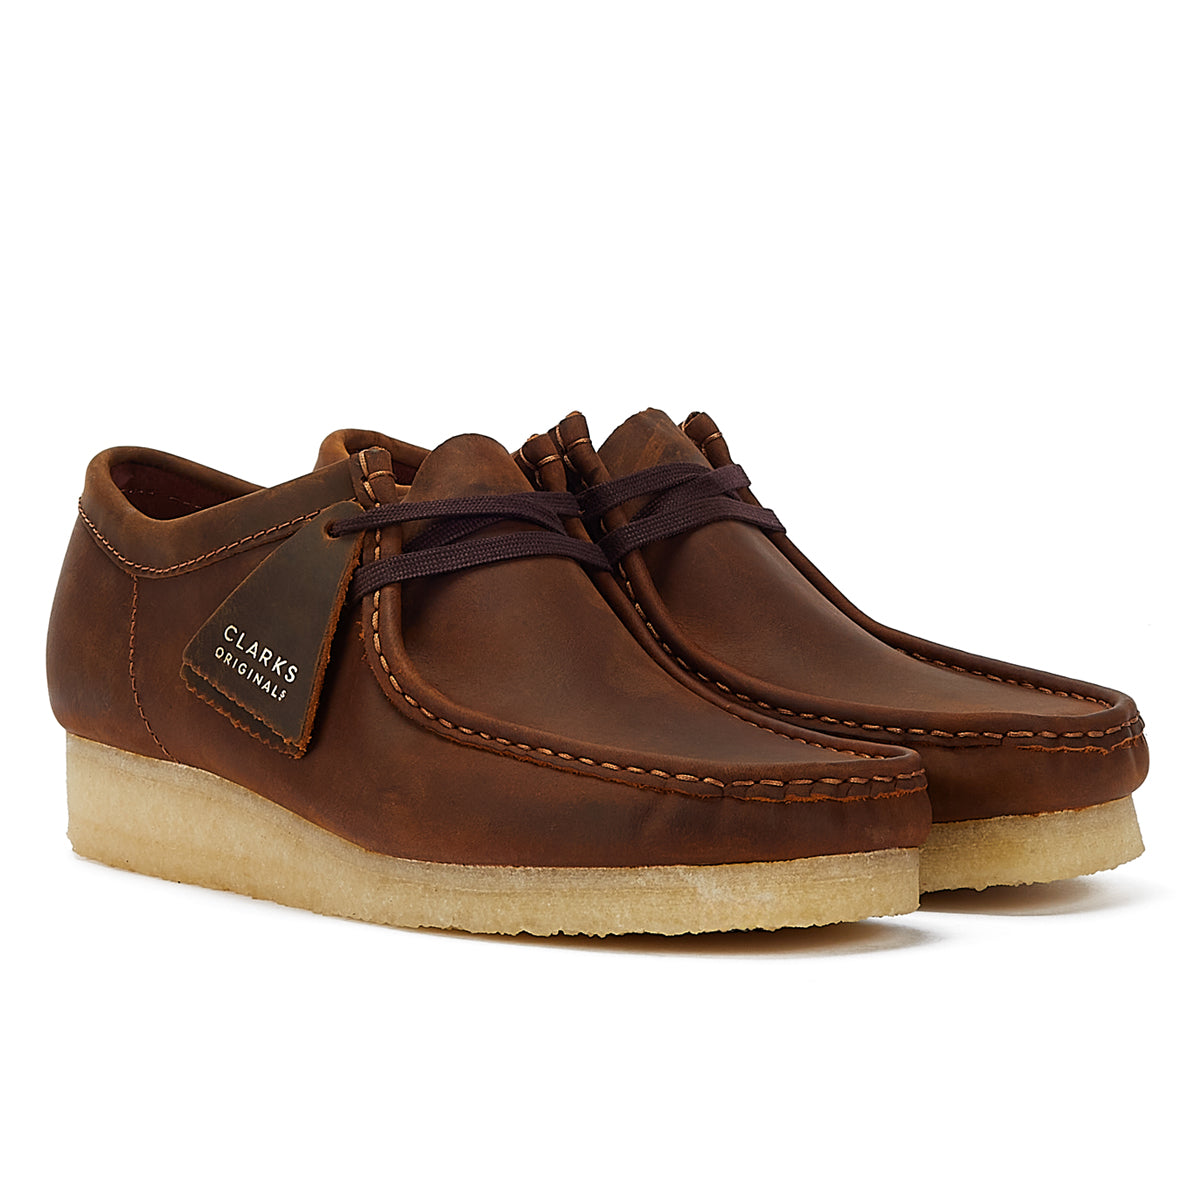 Clarks Wallabee Beeswax Men’s Brown Lace-Up Shoes